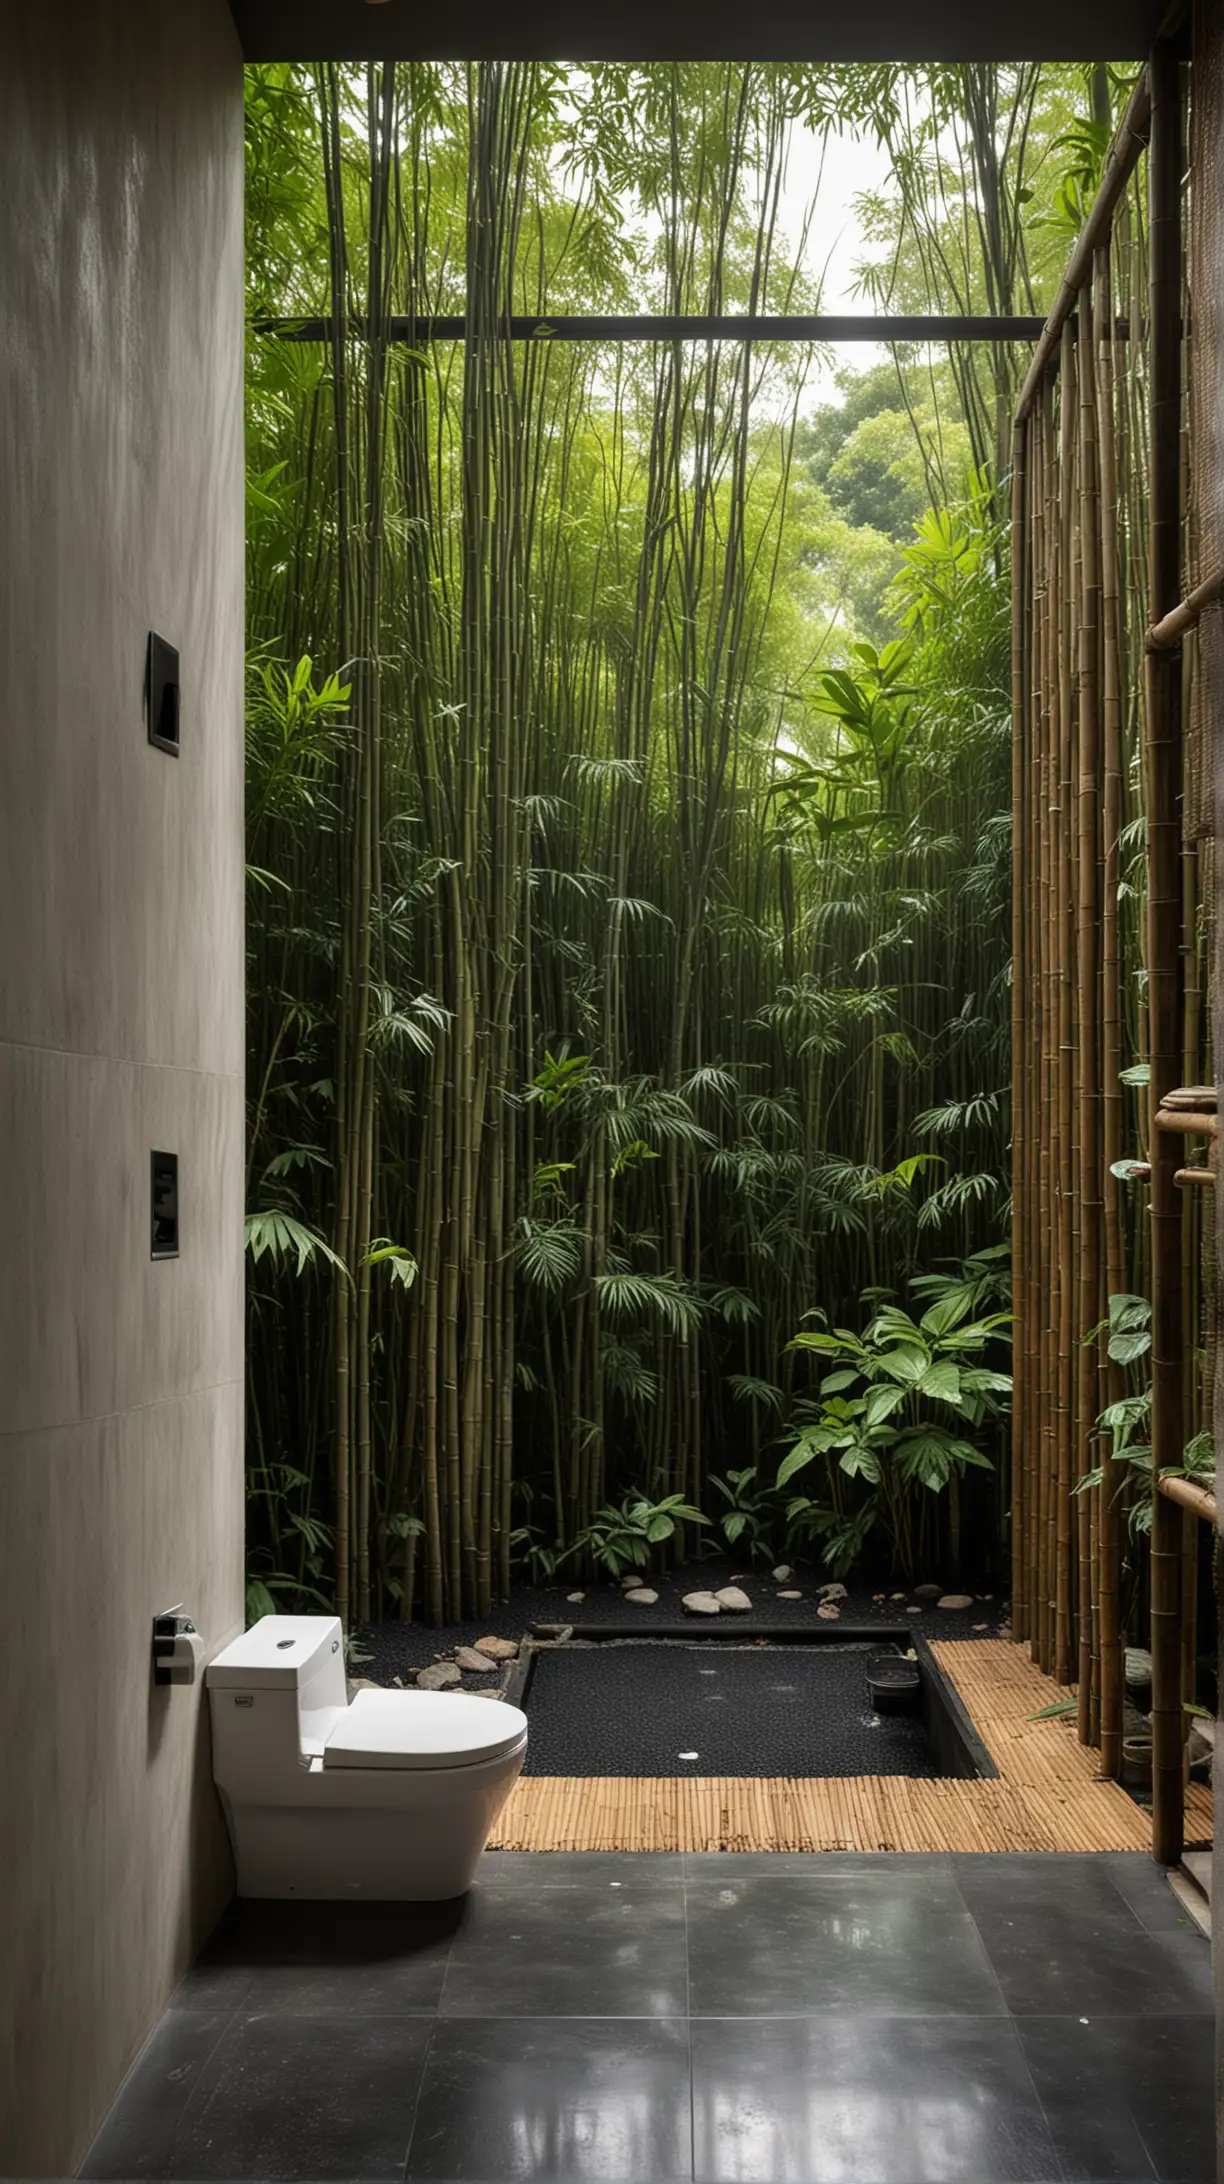 Tropical Rainforest Bathroom with Bamboo Screens and Black Gravel Floor